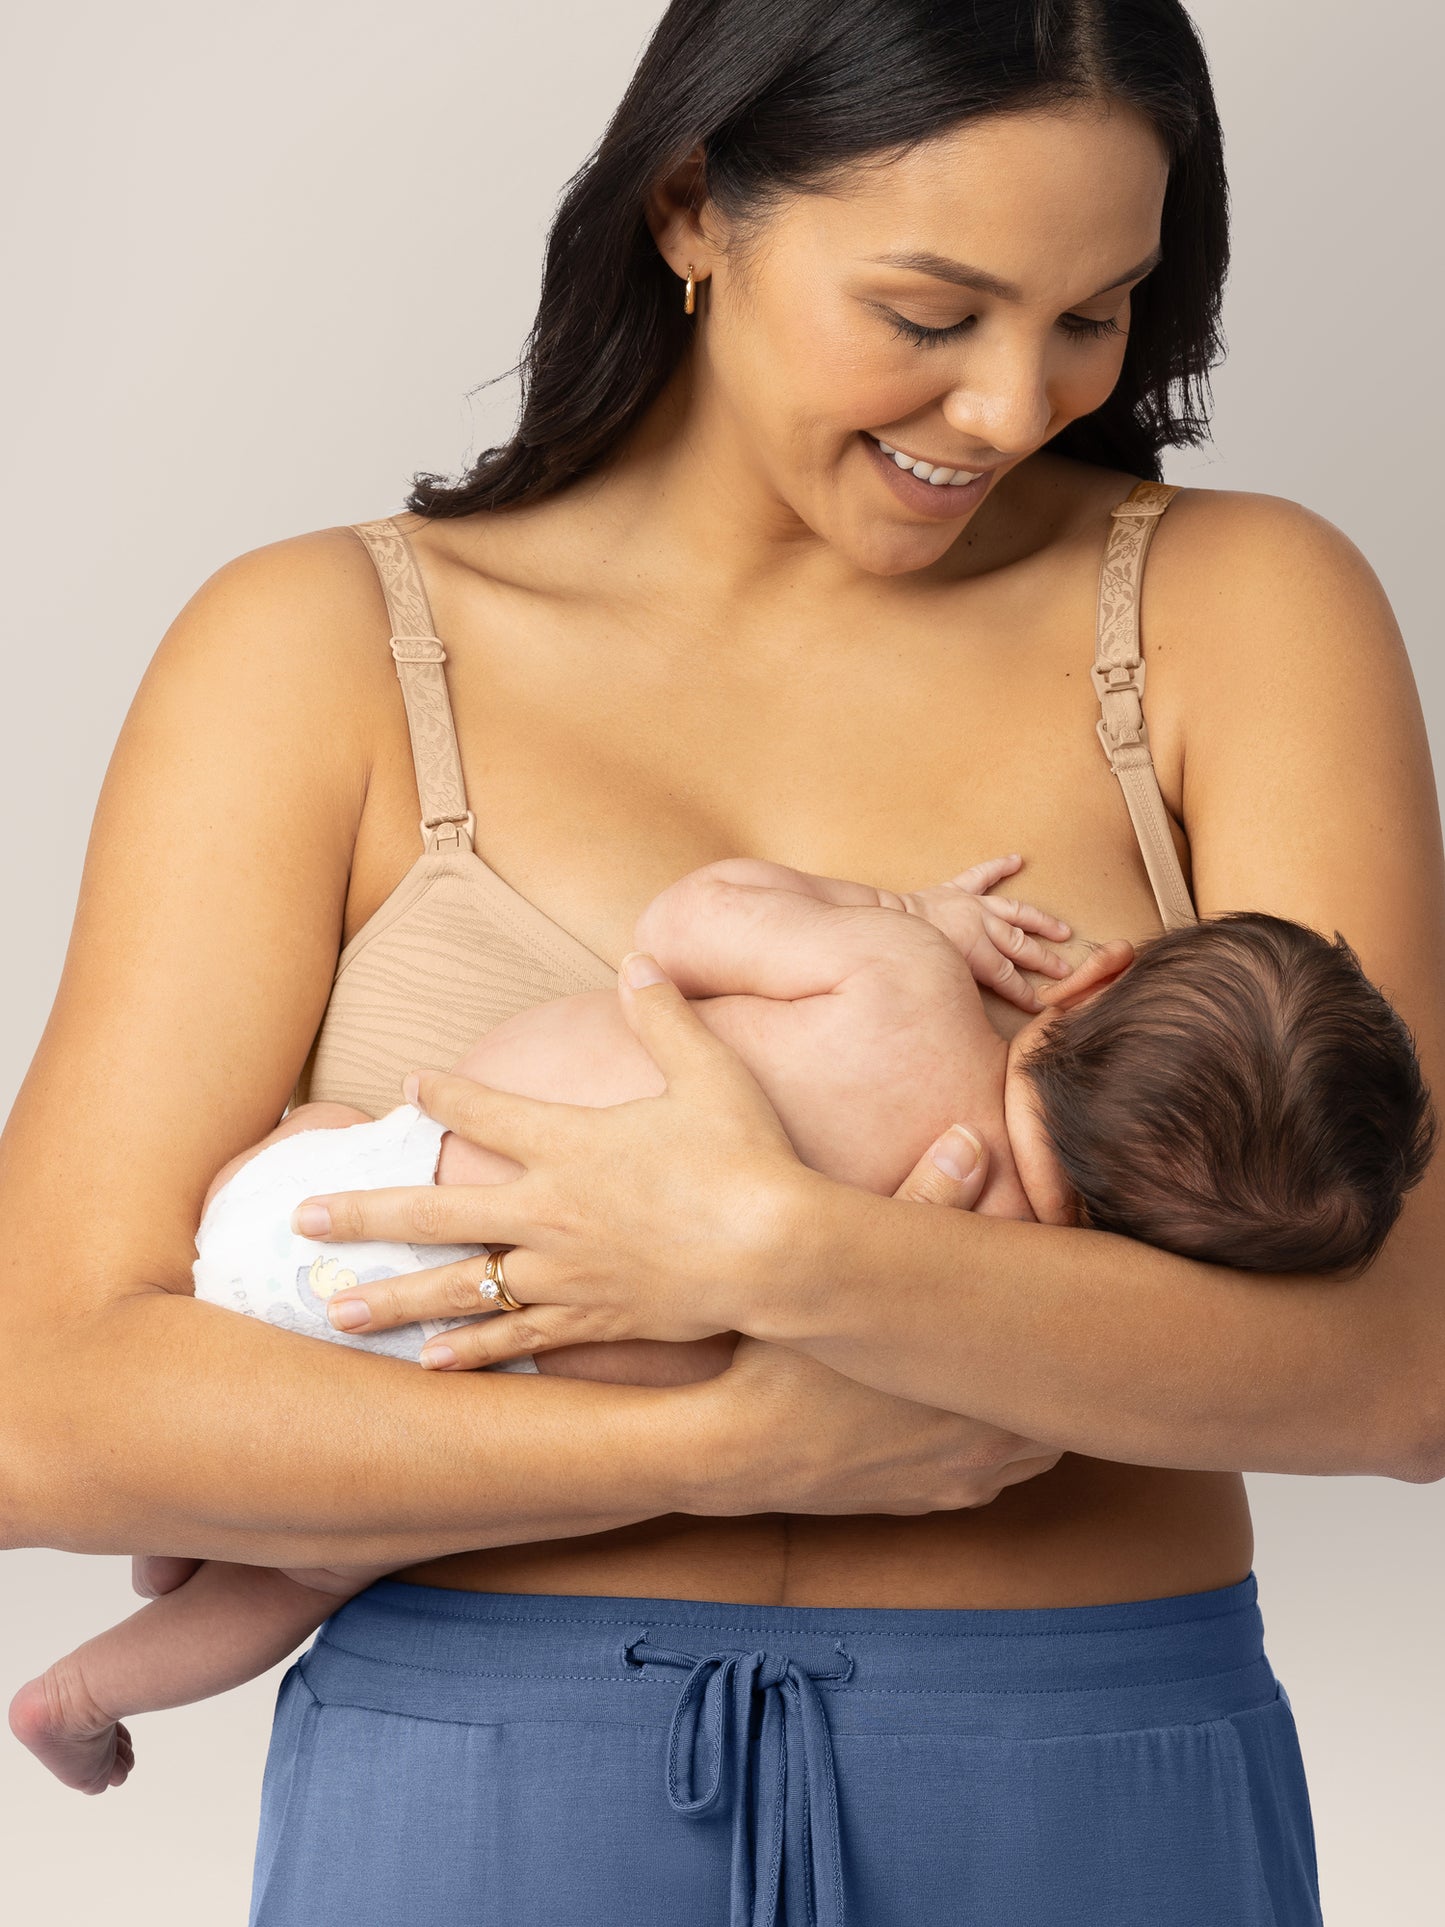 Model breastfeeding her baby while wearing the Sublime® Hands-Free Pumping & Nursing Bra in Beige